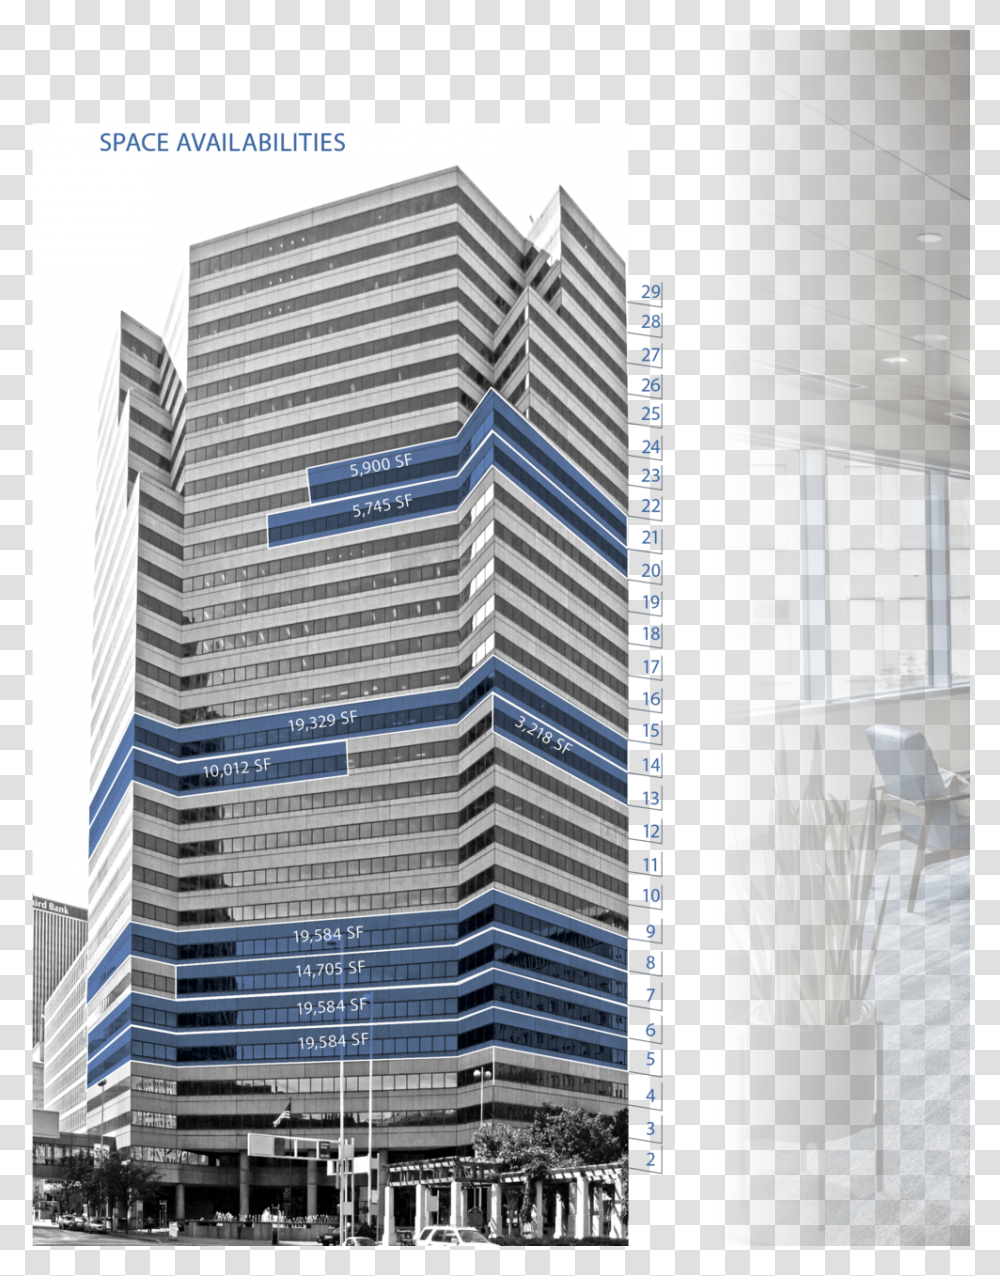 Columbia Plaza Availabilities Commercial Building, Office Building, High Rise, City, Urban Transparent Png